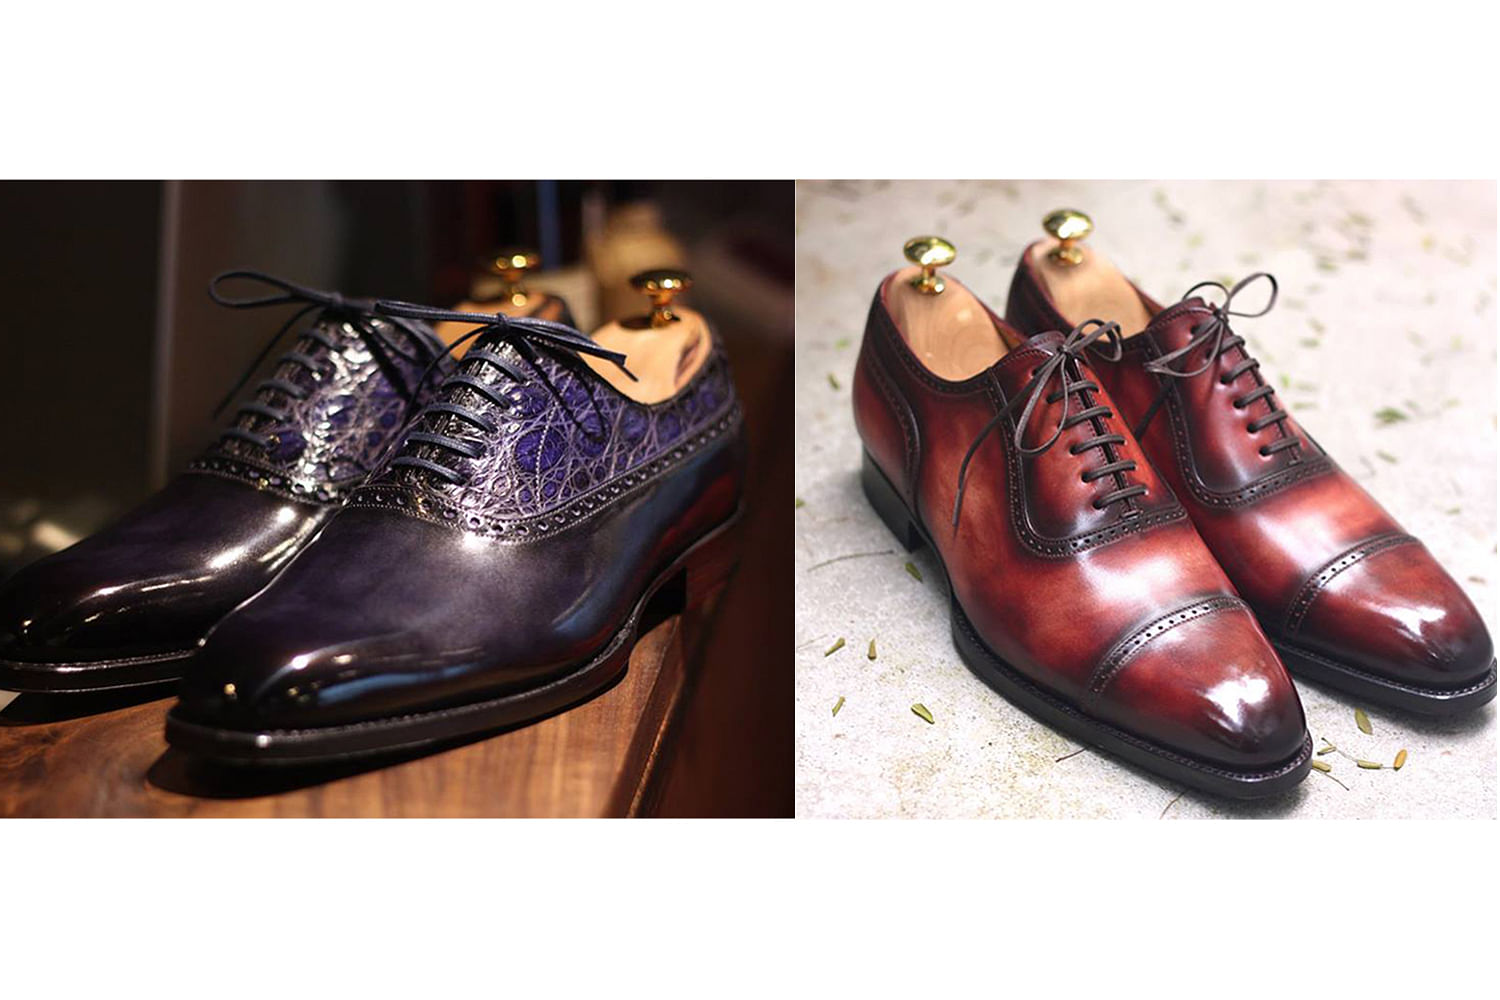 Bespoke Shoes For The Groom: Where to Get Stylish Designs